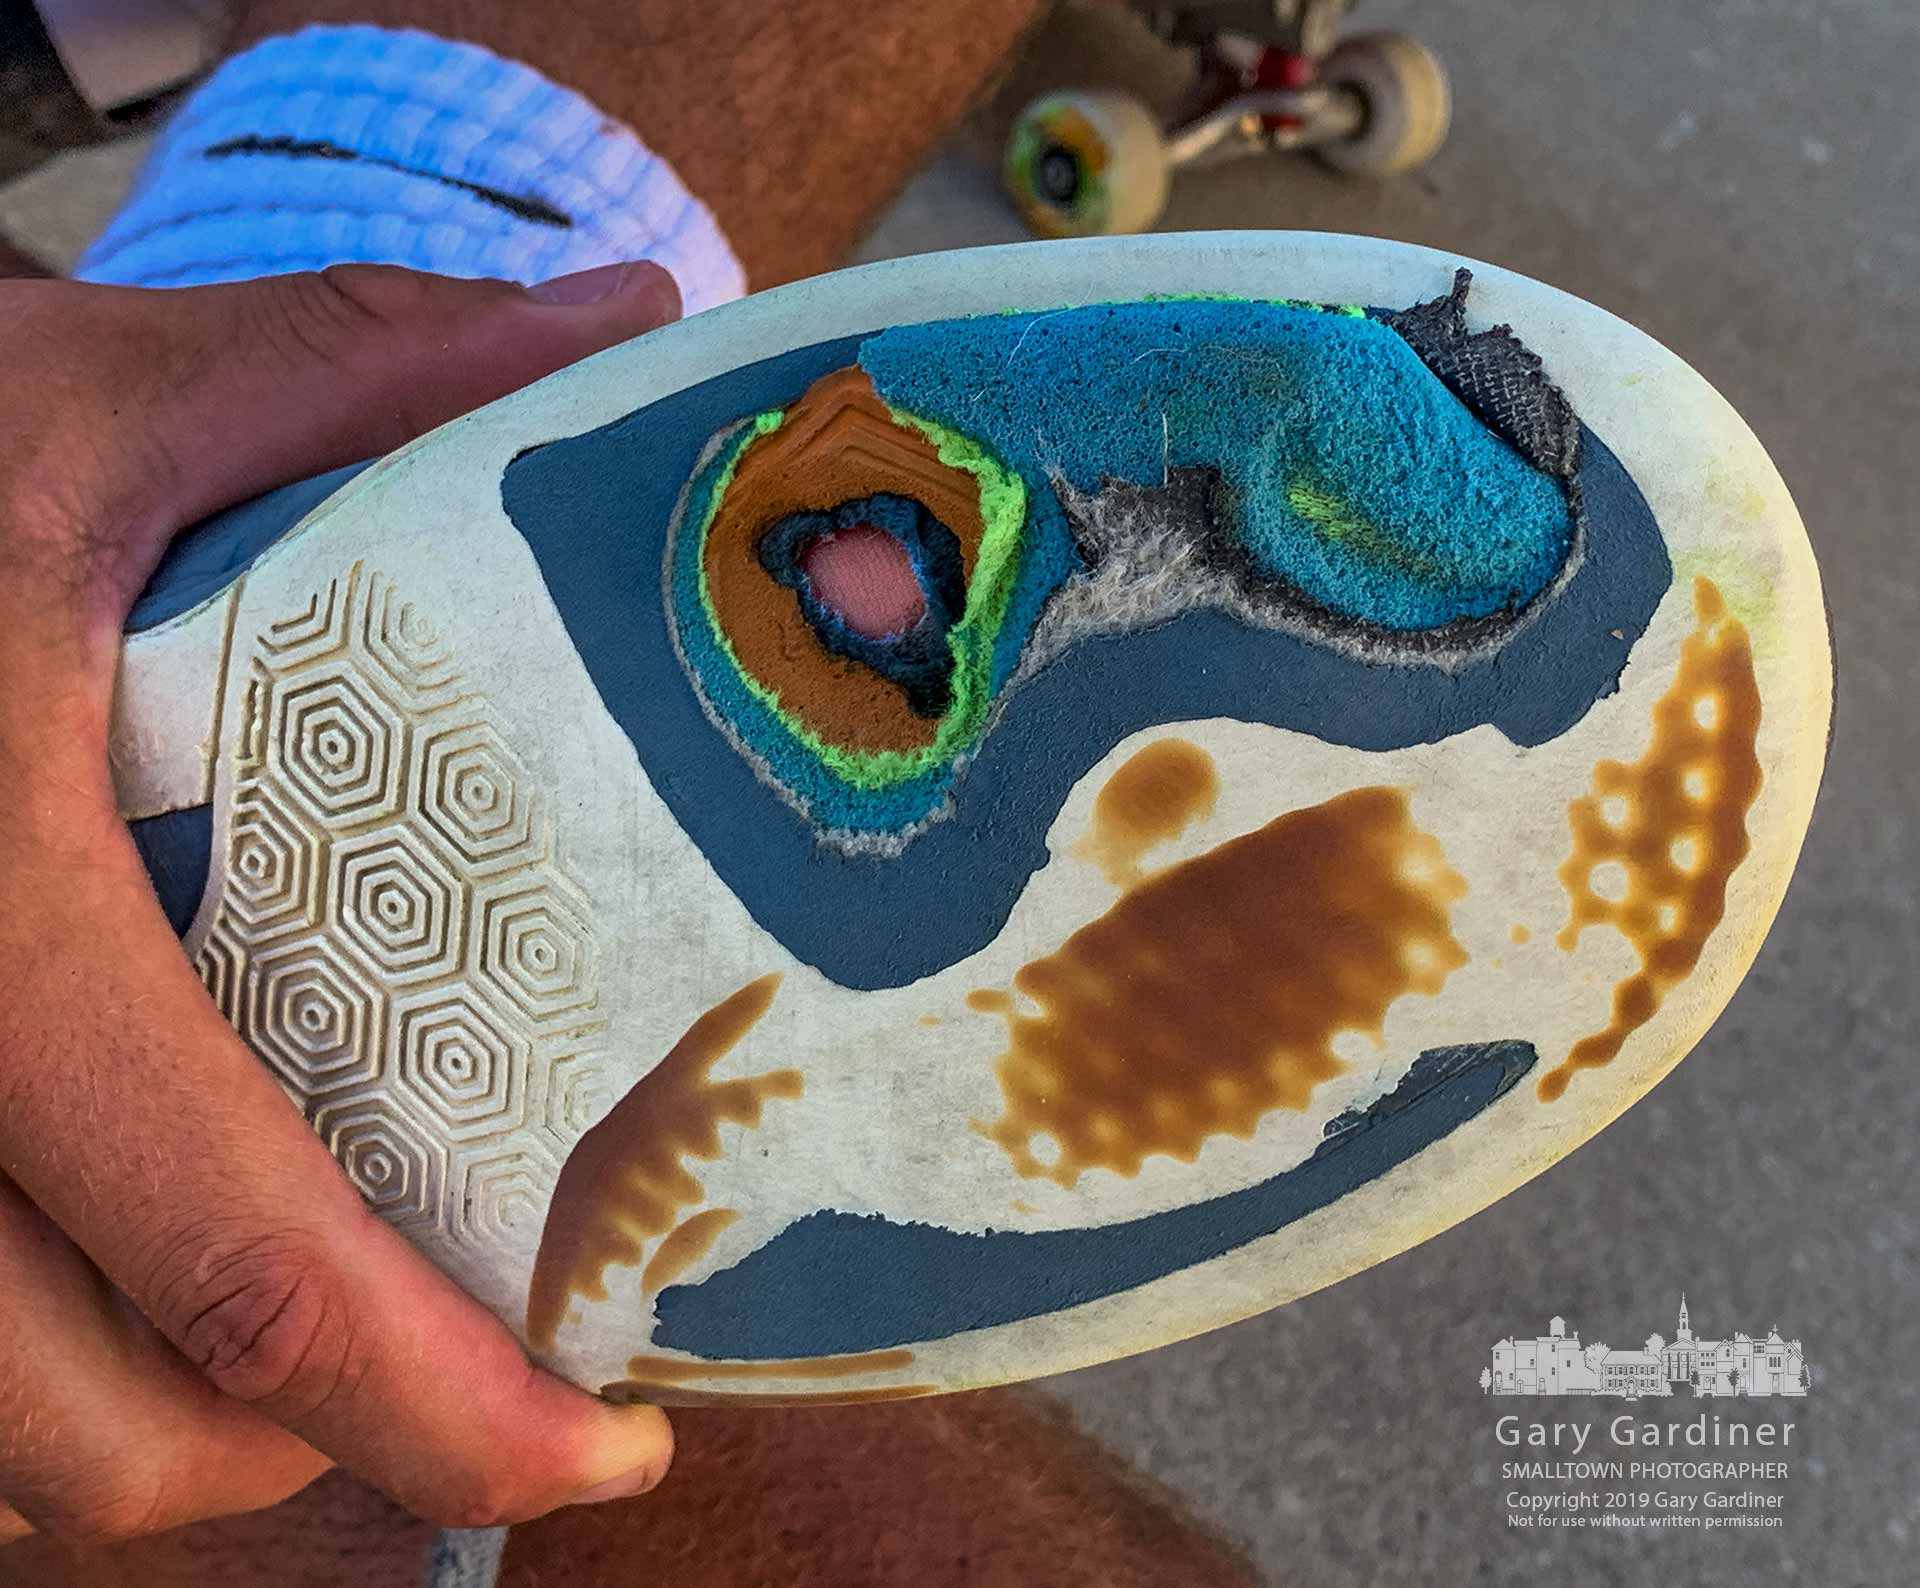 A skateboarder shows how the bottom of his foot shows through the sole of his skating shoes after a missed trick at the Westerville Skatepark further damaged the shoe and his foot. My Final Photo for Aug. 4, 2019.